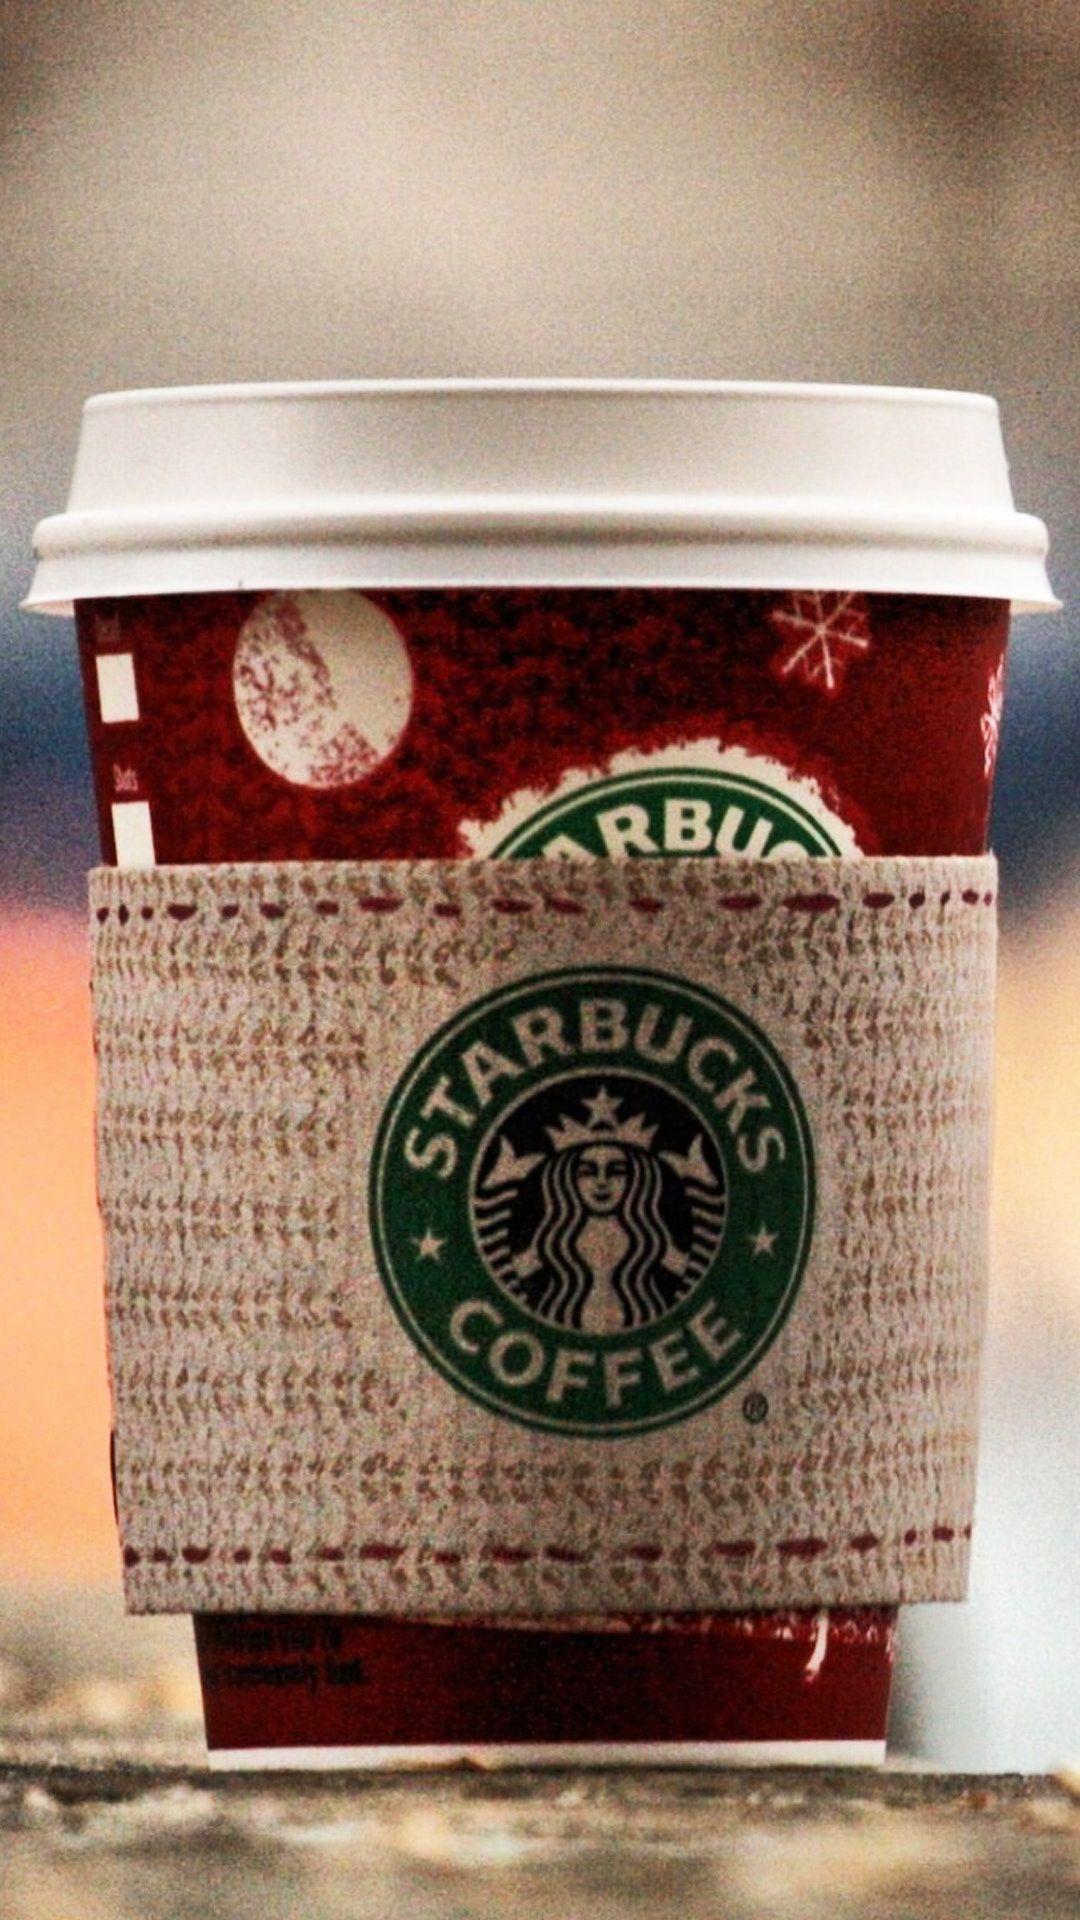 Starbucks Coffee Winter HTC One Android Wallpaper free download